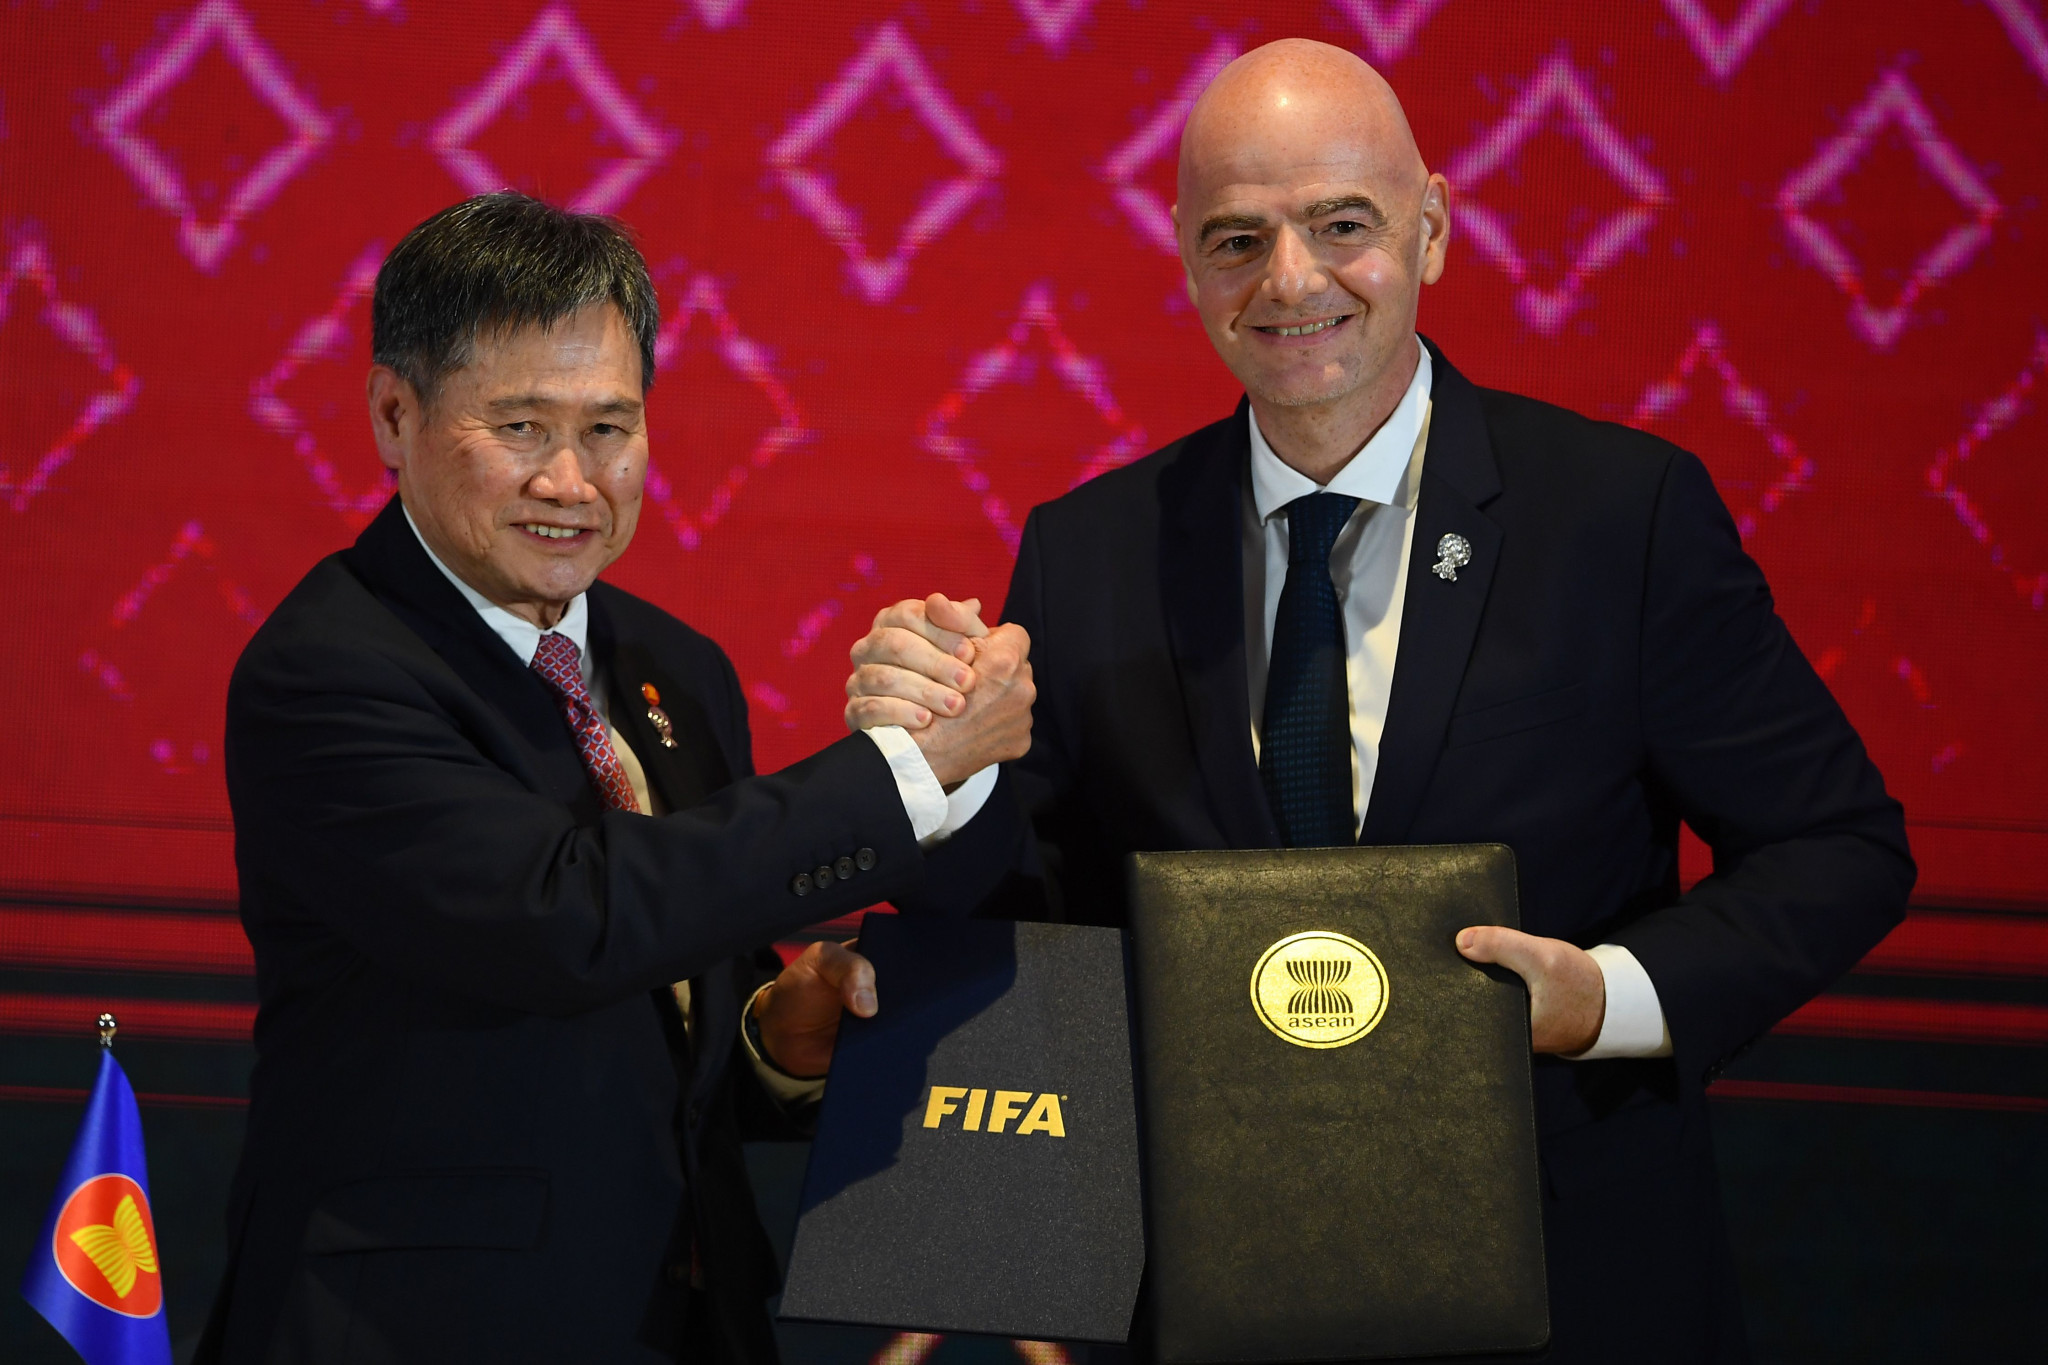 FIFA and ASEAN sign collaboration agreement